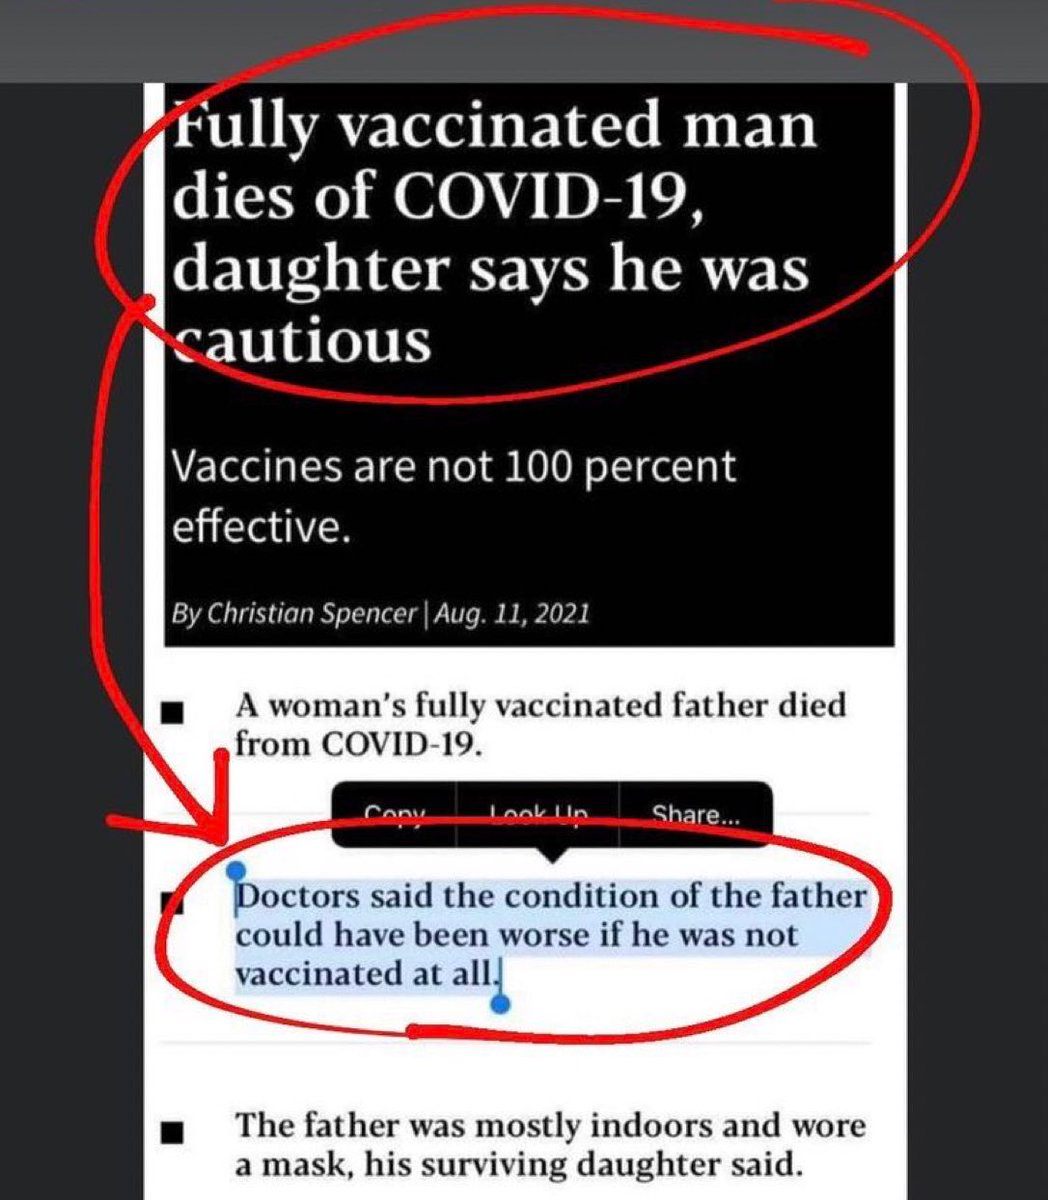 Hypcrite: random doctors who say it's lucky the man who died from Covid had the vaccine or it could have been worse.